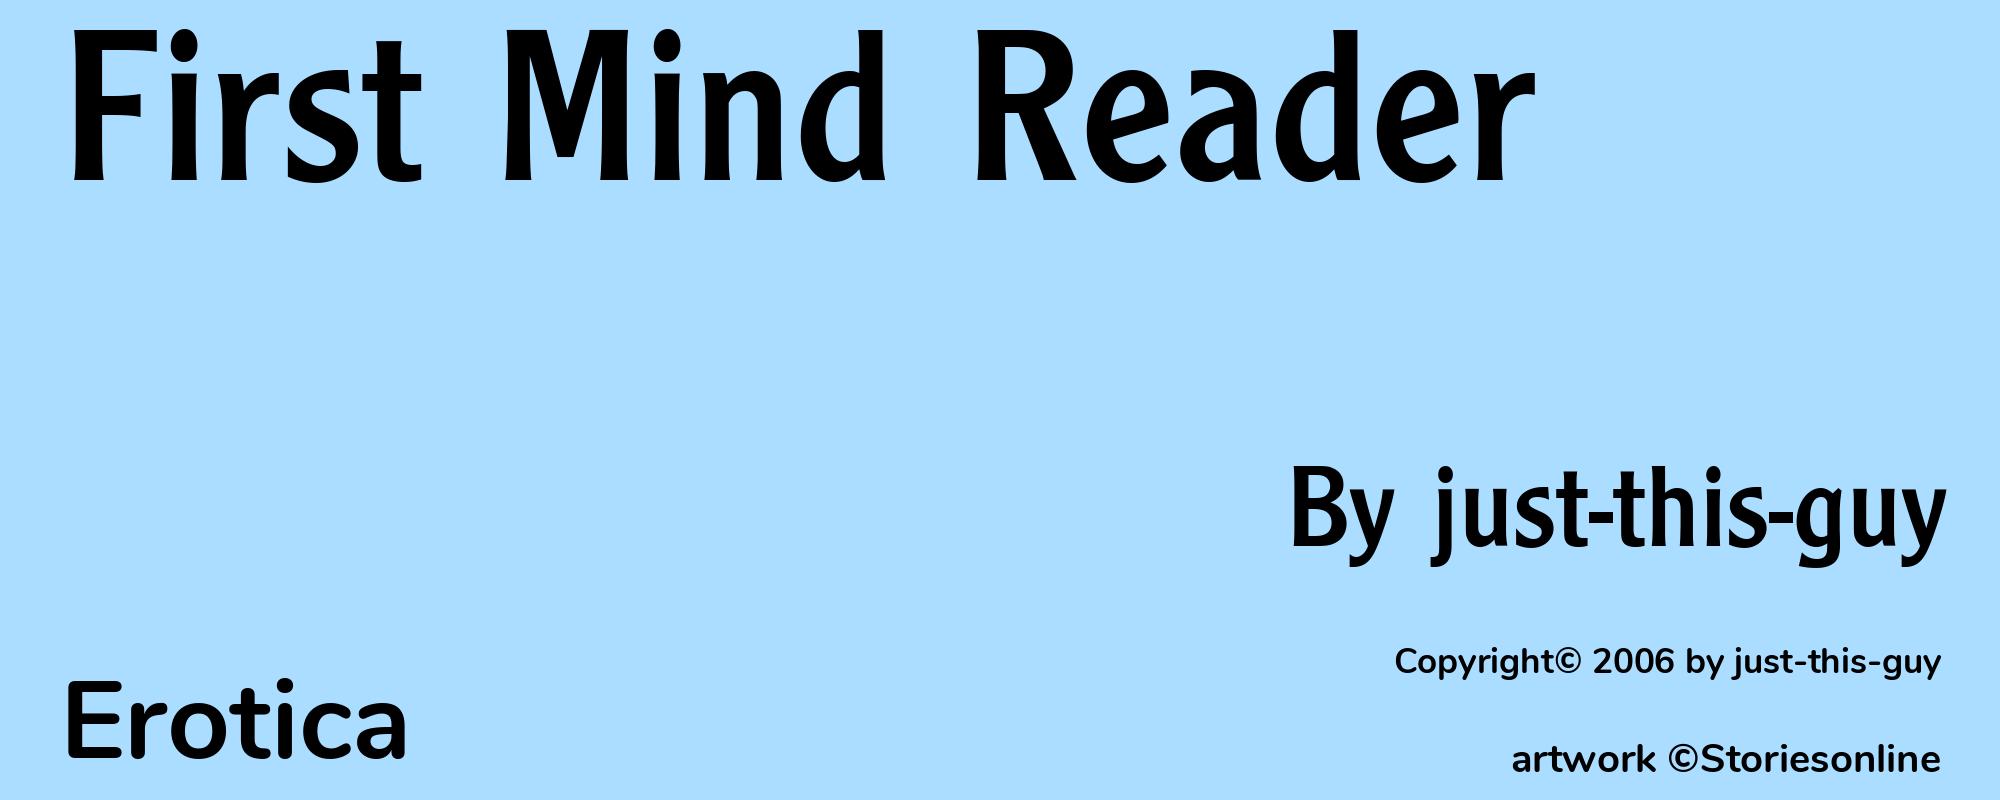 First Mind Reader - Cover